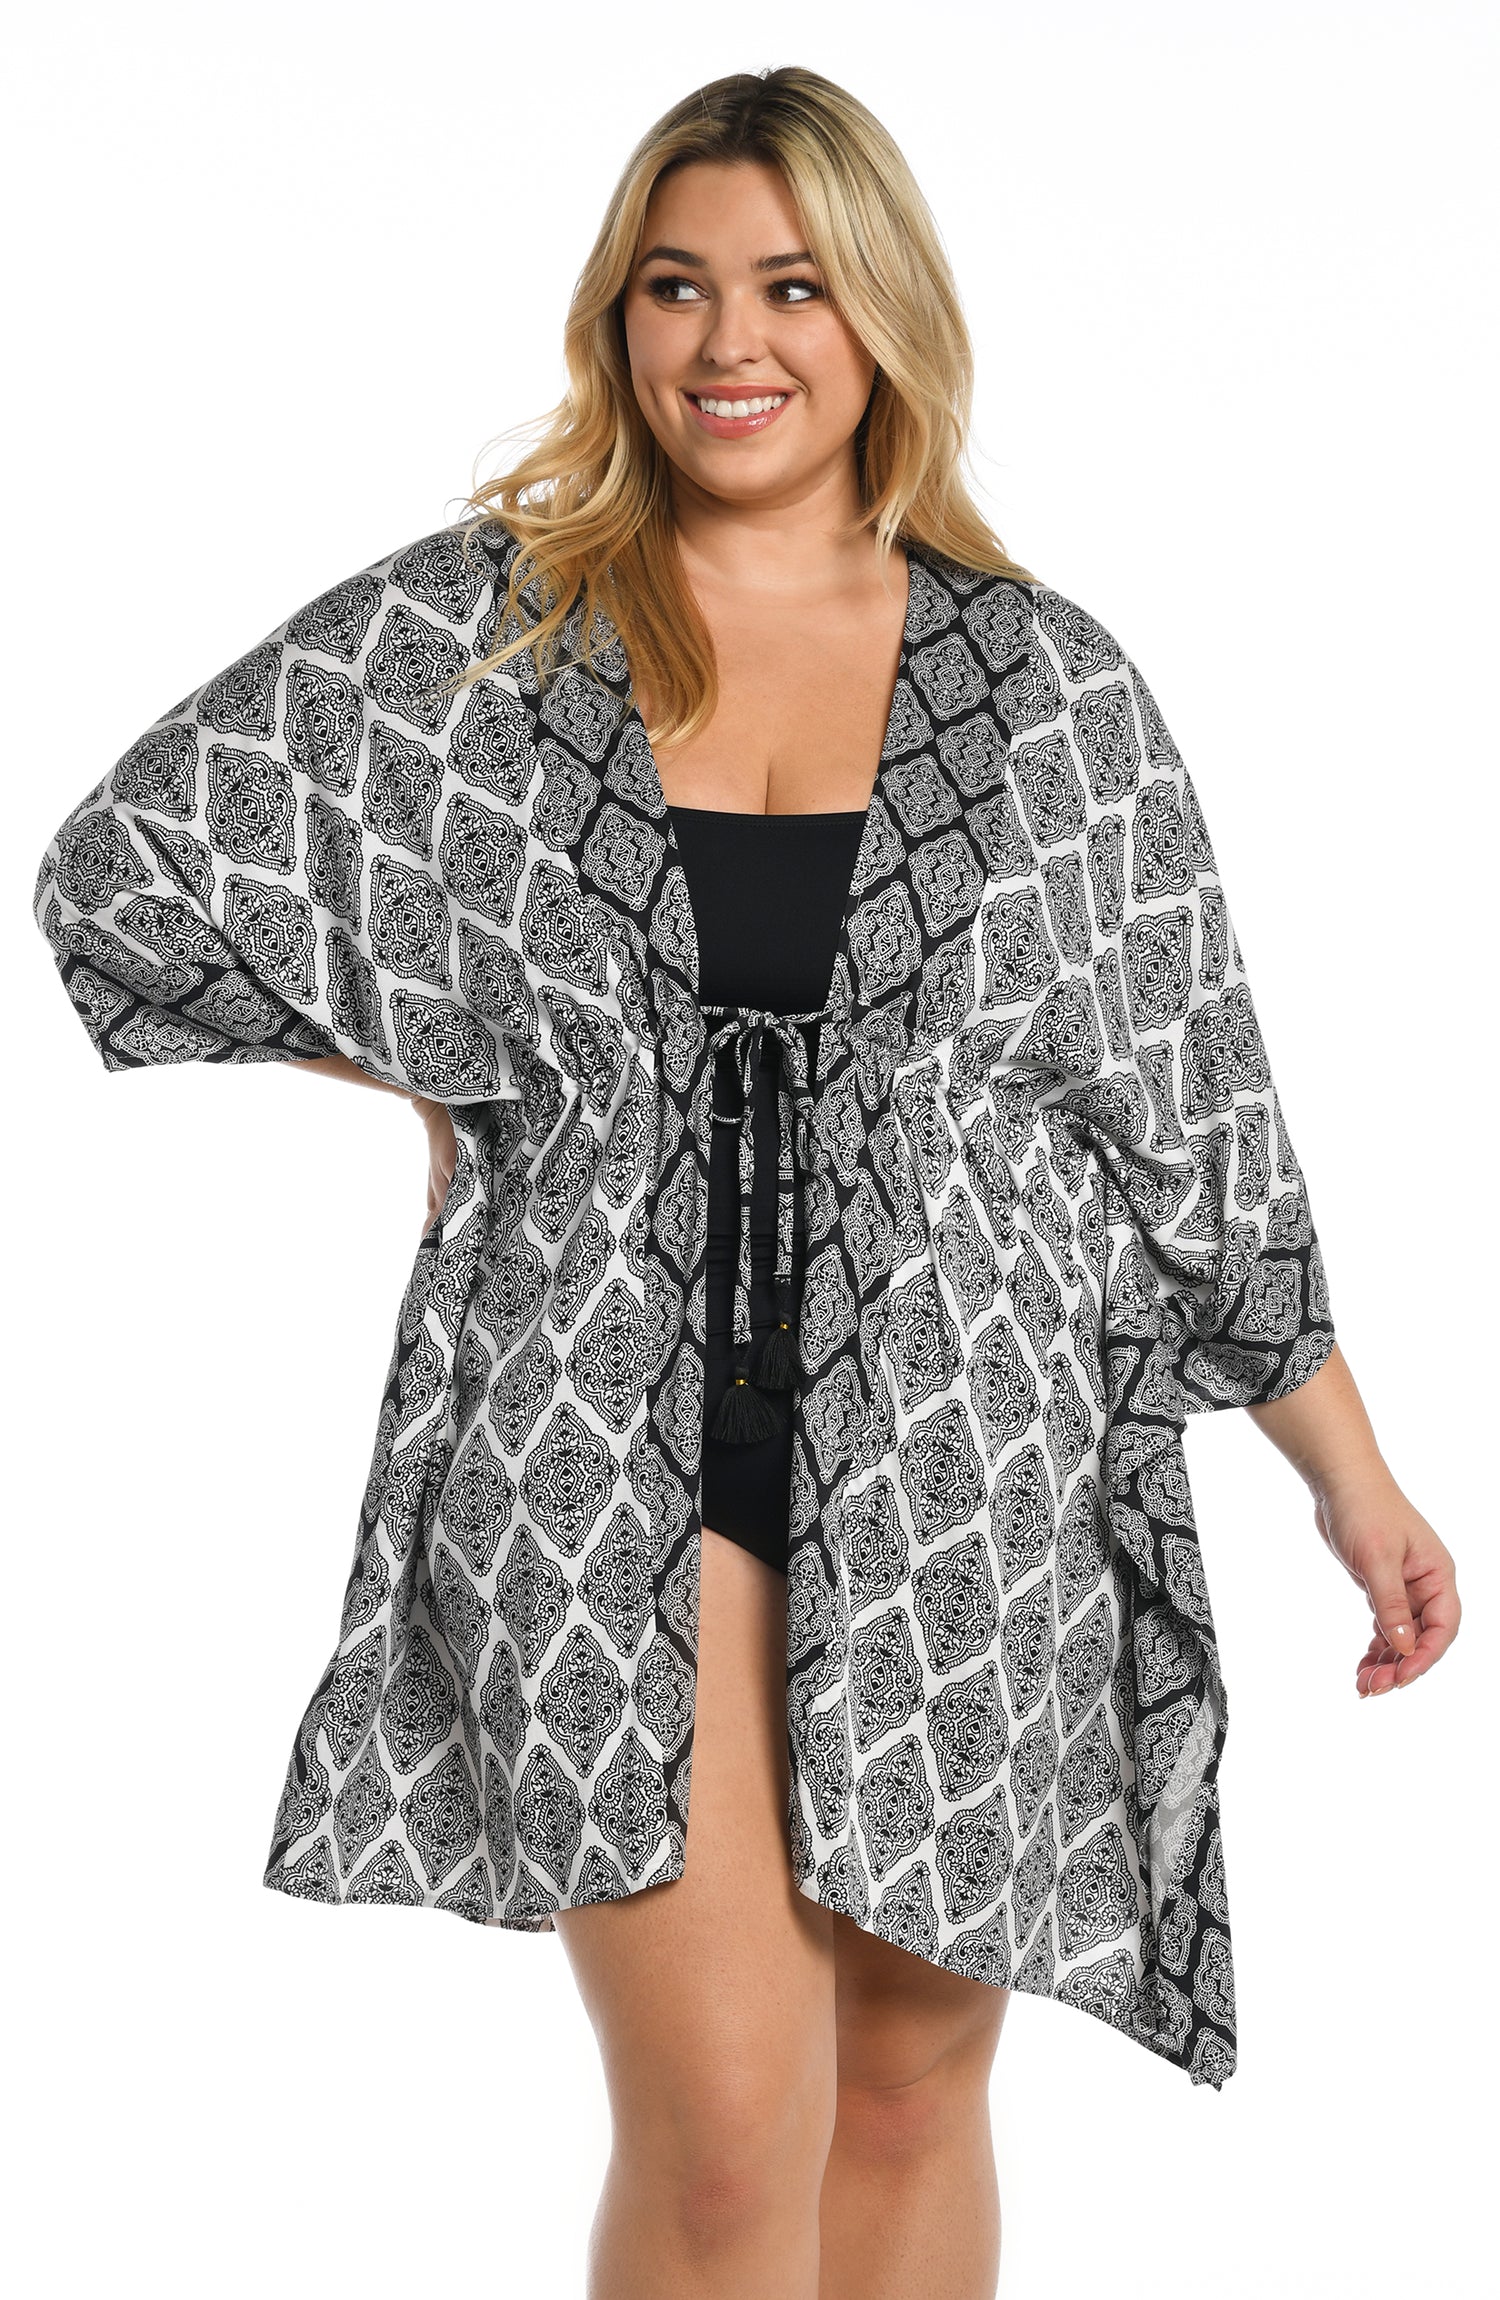 Model is wearing a black and white geometric printed kimono cover up from our Oasis Tile collection!